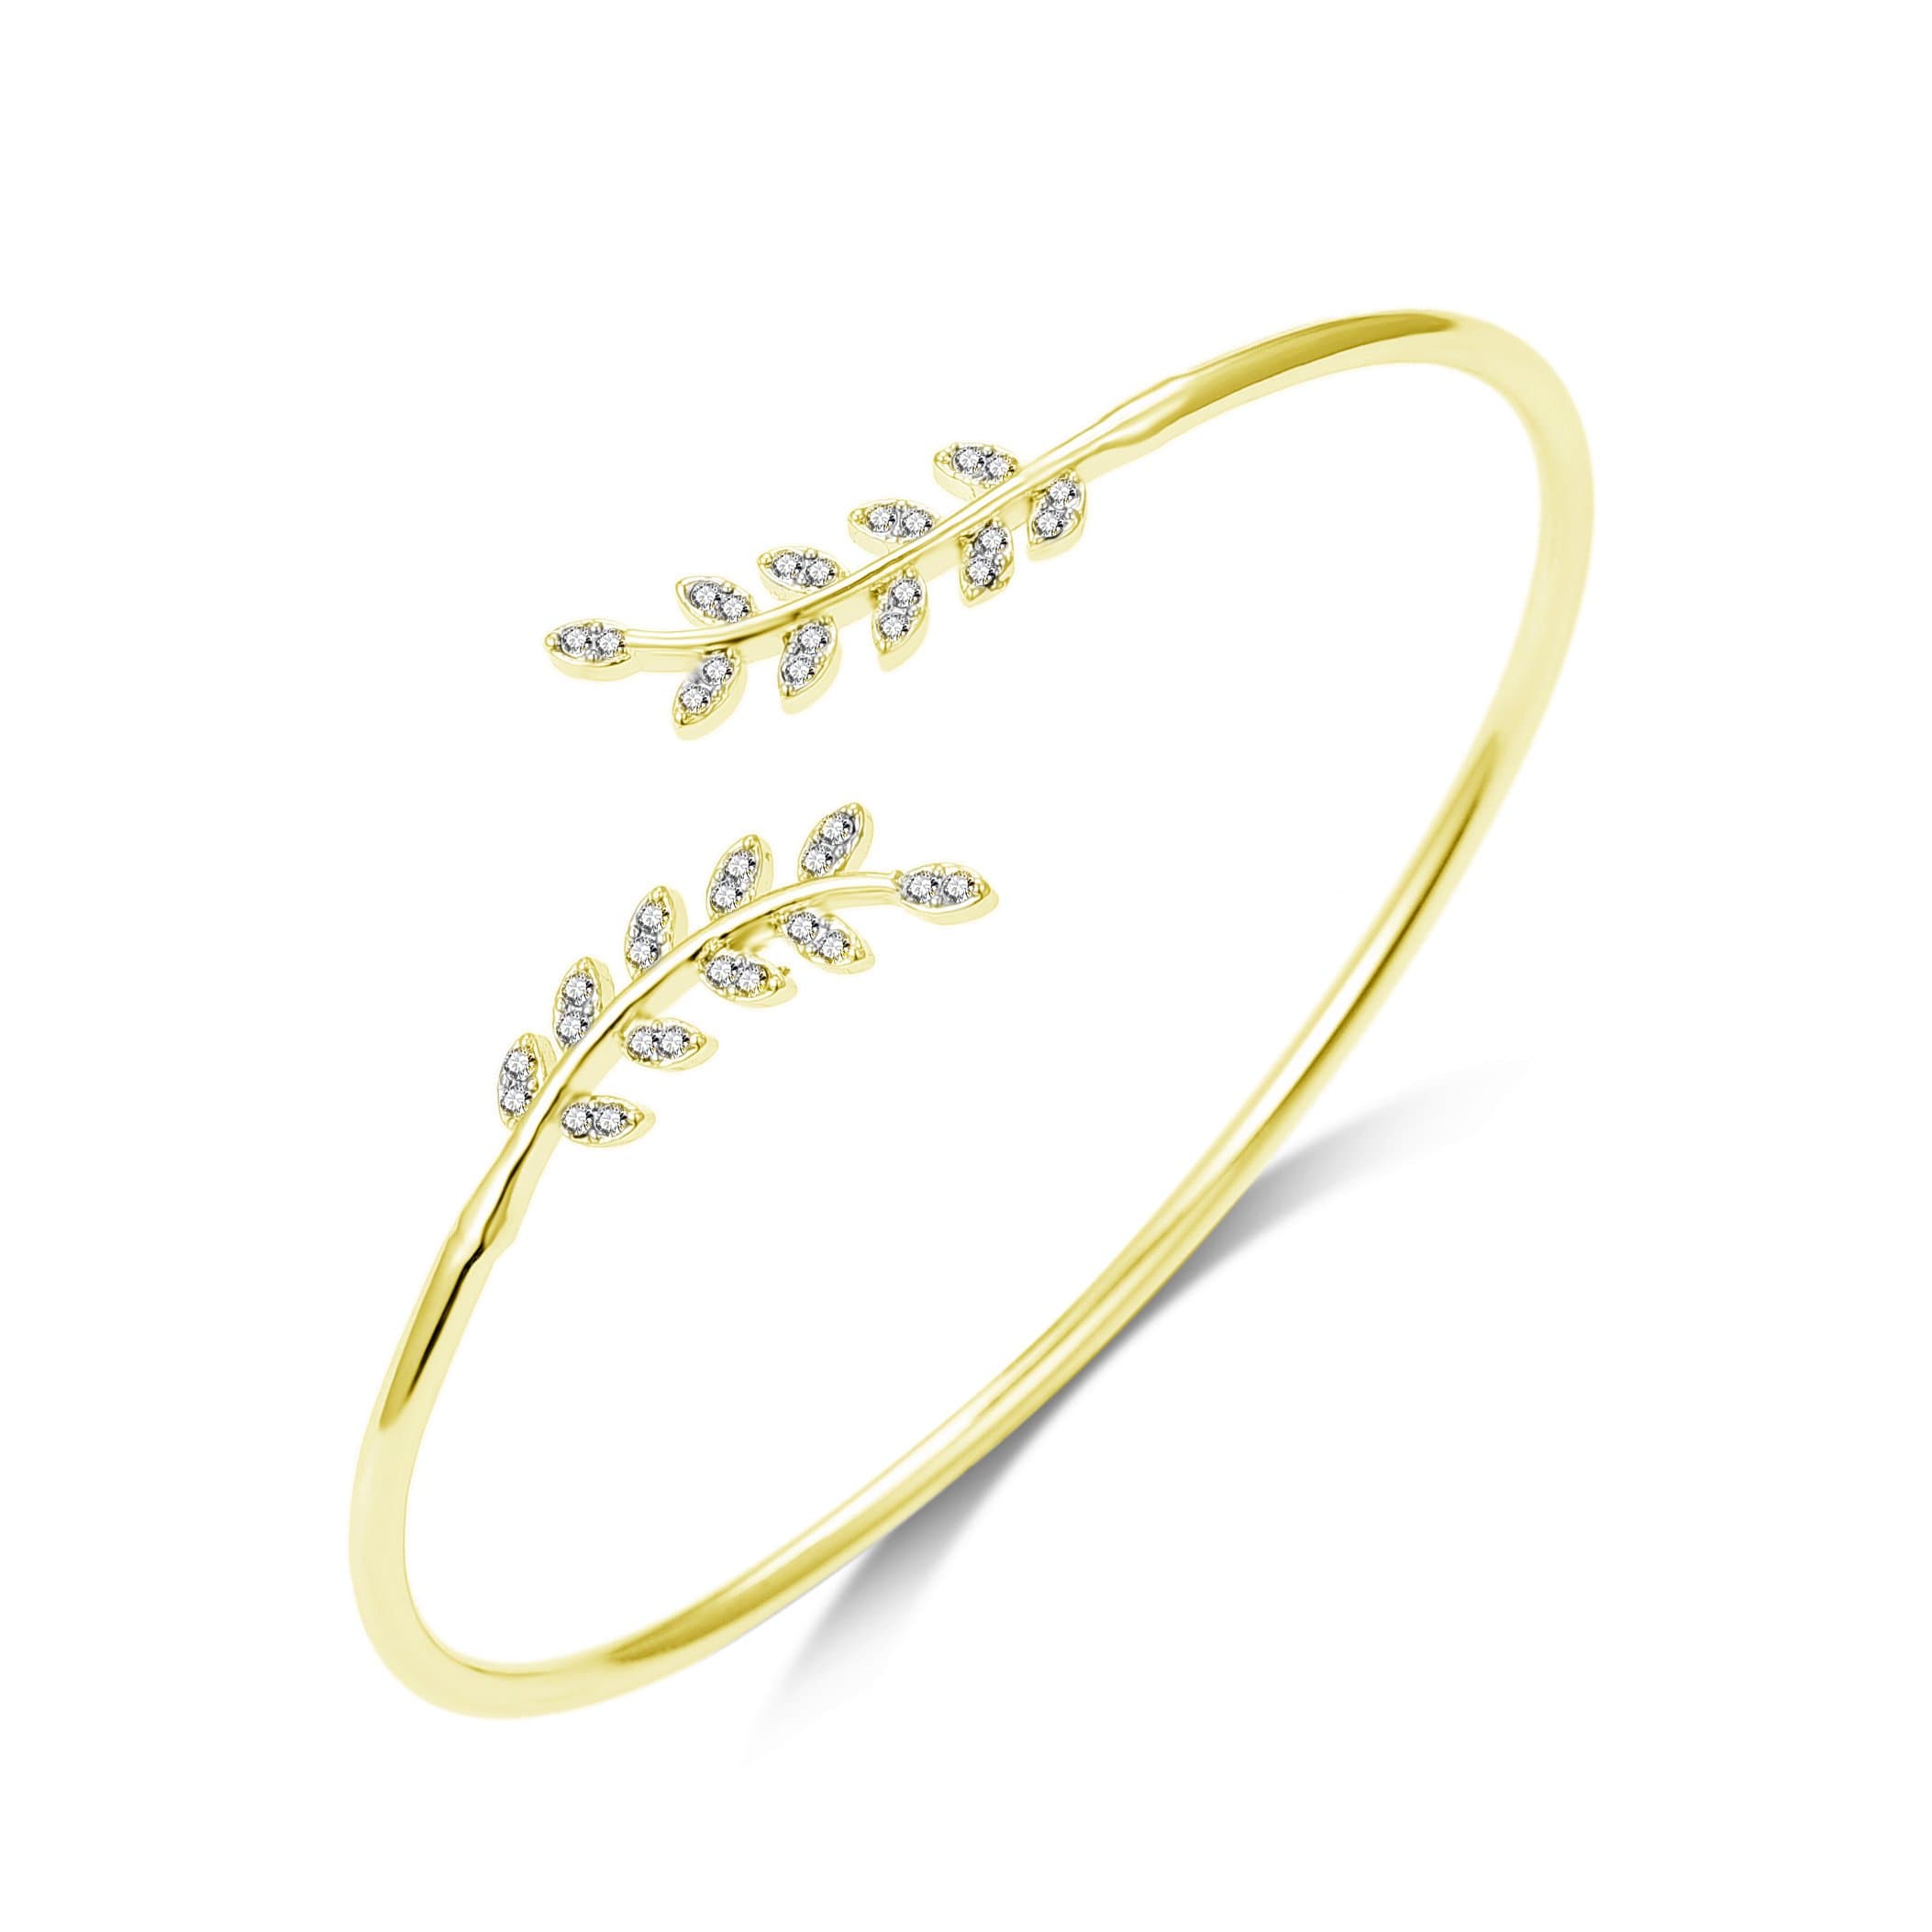 Gold Plated Leaf Bangle Created with Zircondia® Crystals by Philip Jones Jewellery